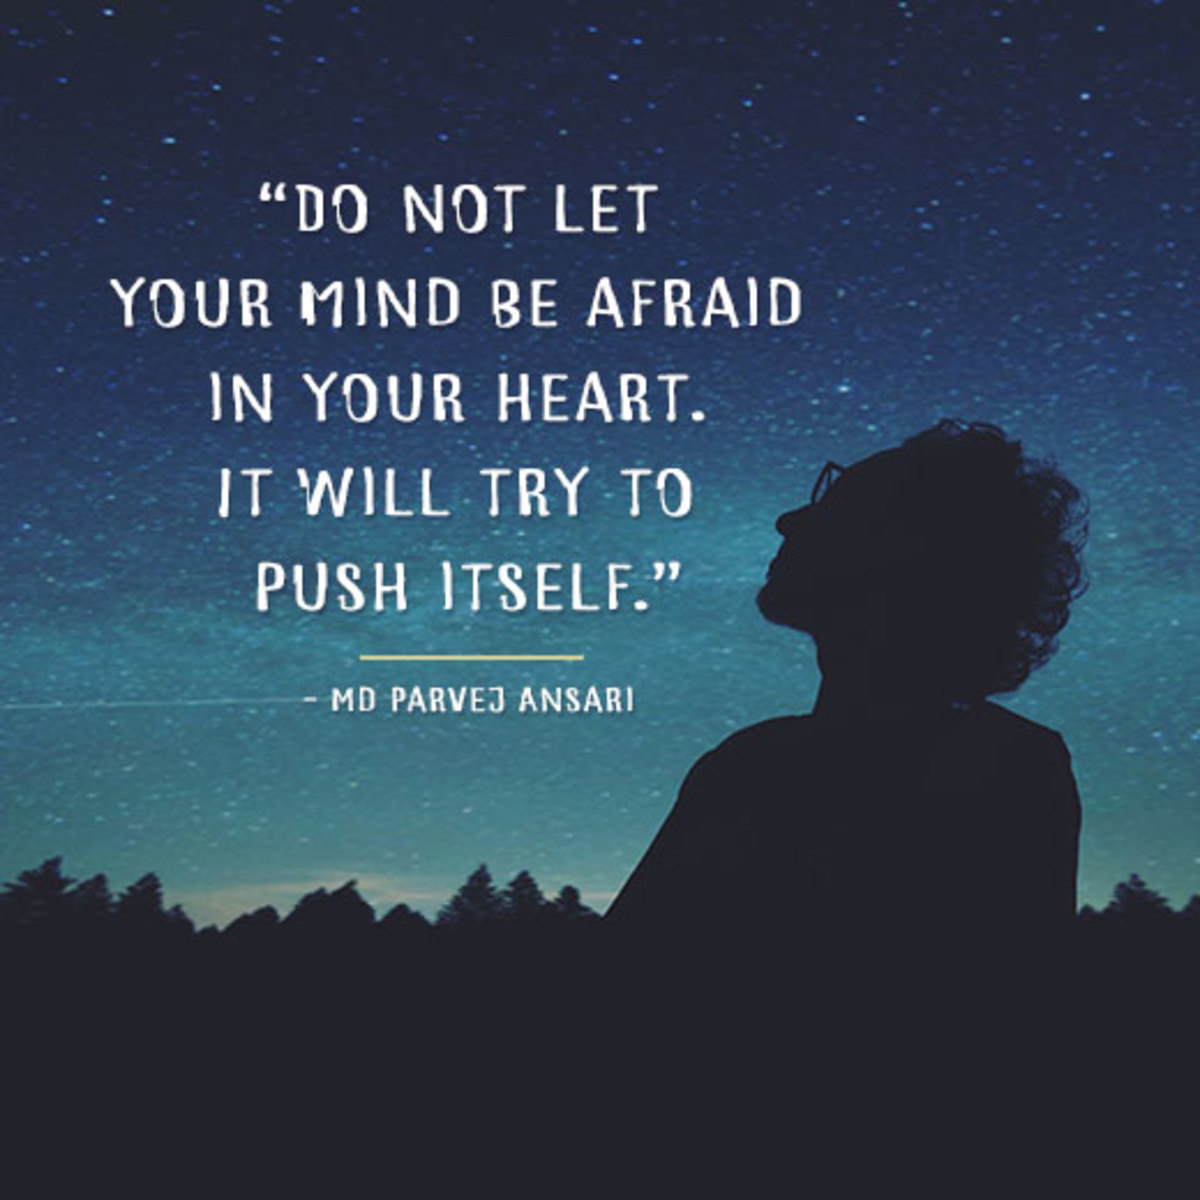 "Do not let your mind be afraid in your heart. It will try to push itself." -  Md Parvej Ansari